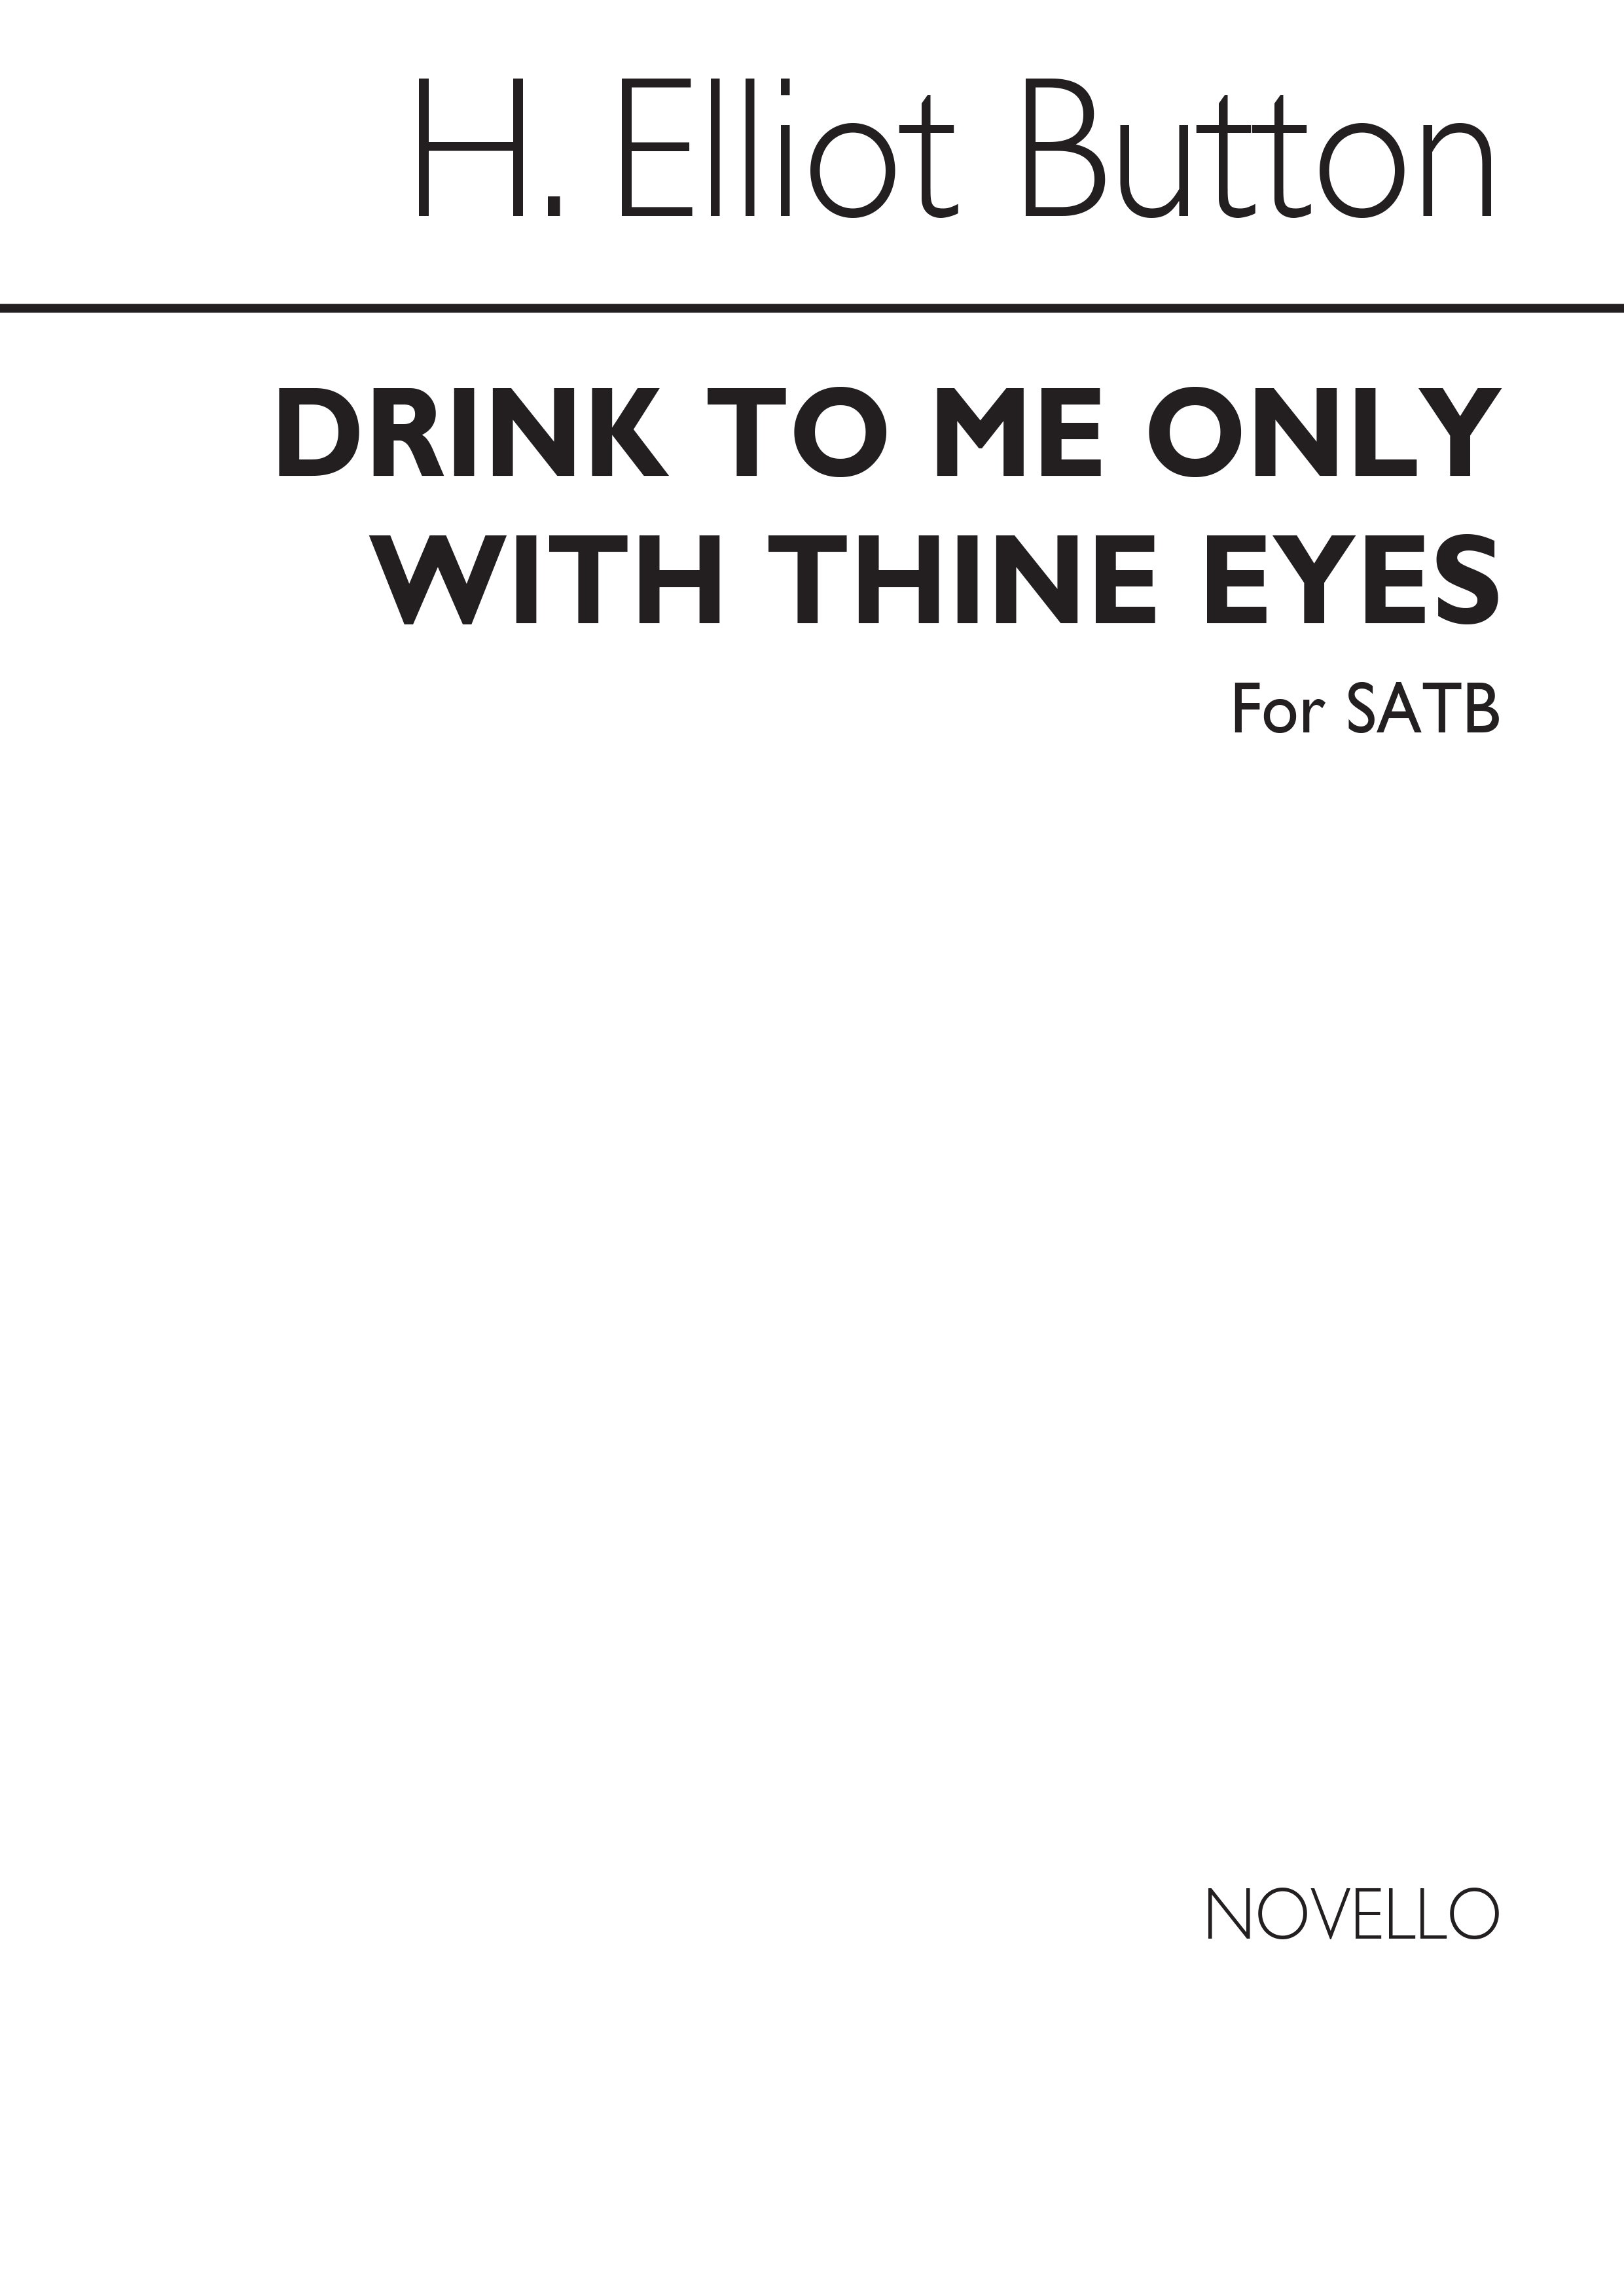 H. Elliot Button: Drink To Me Only With Thine Eyes SATB